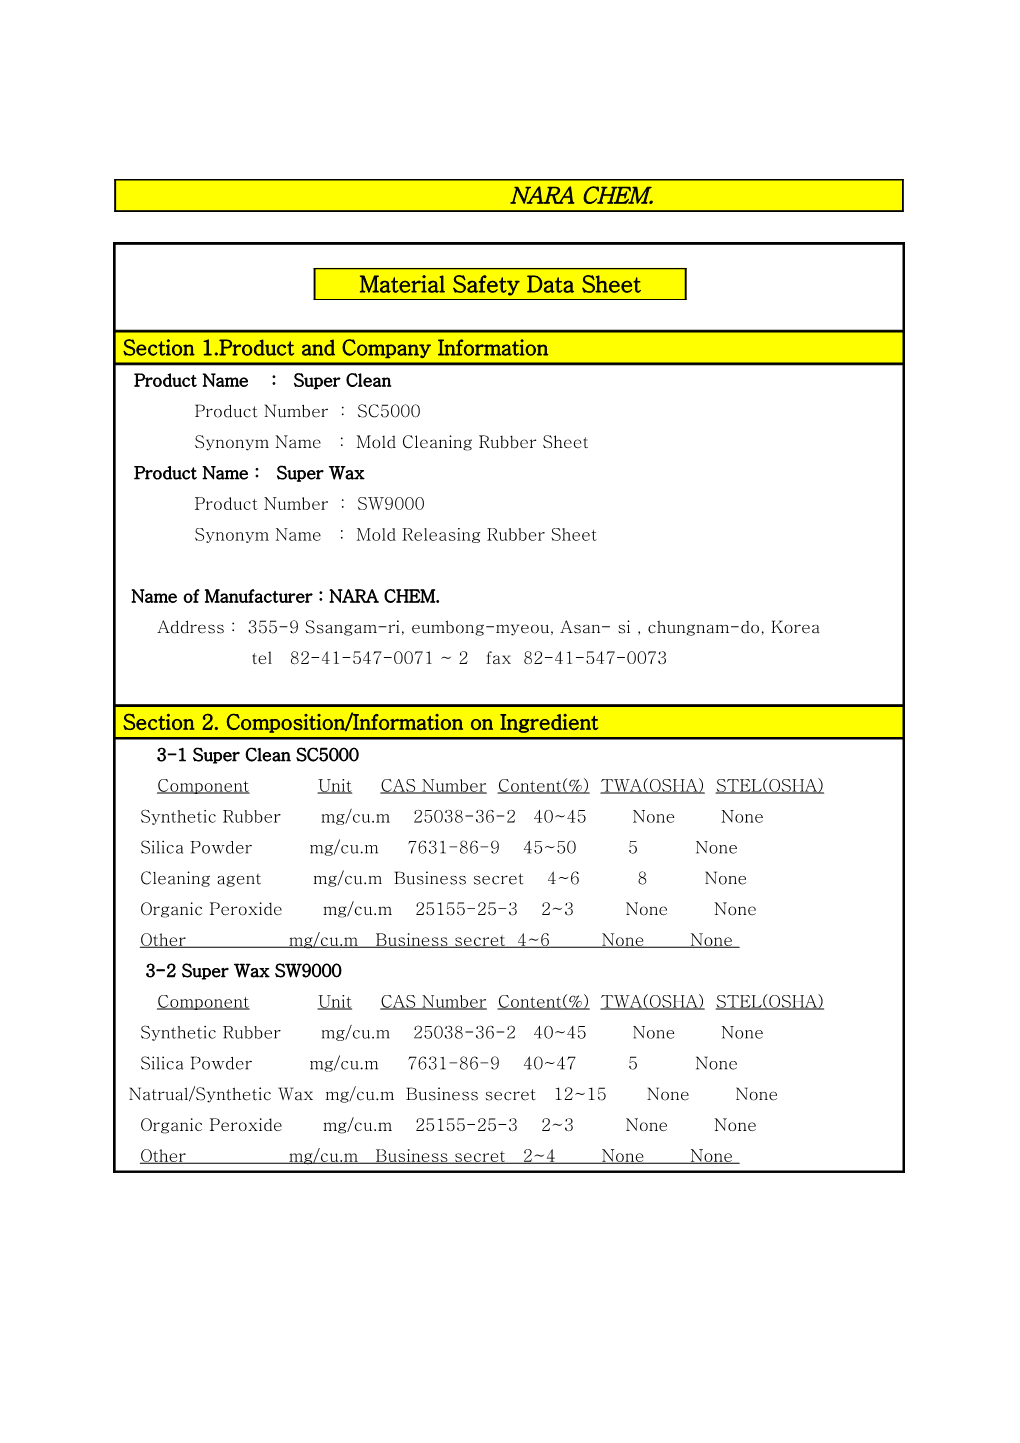 Material Safety Data Sheet s6